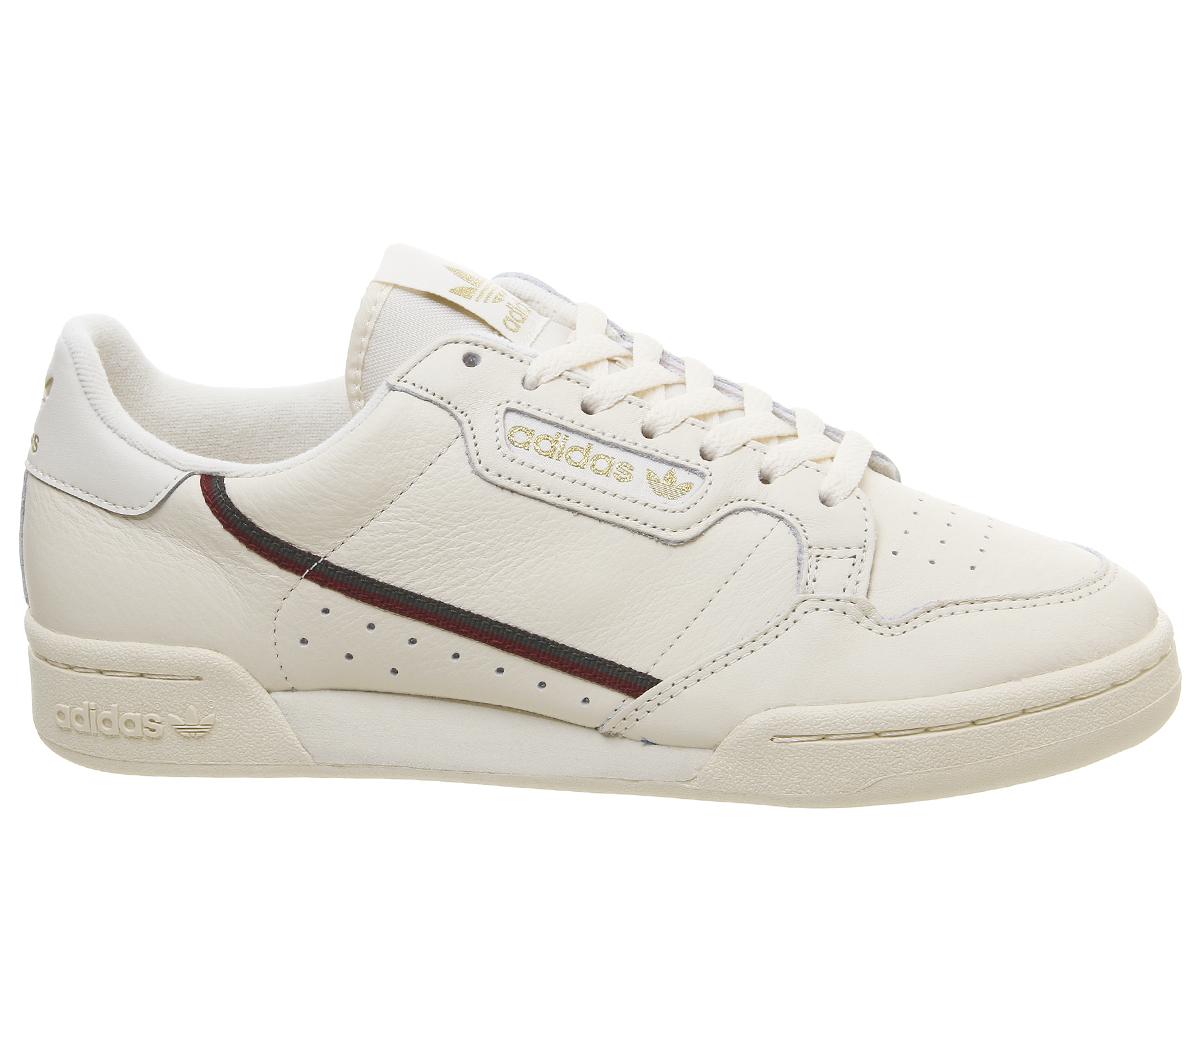 adidas continental 80s trainers chalk night cargo met gold exclusive